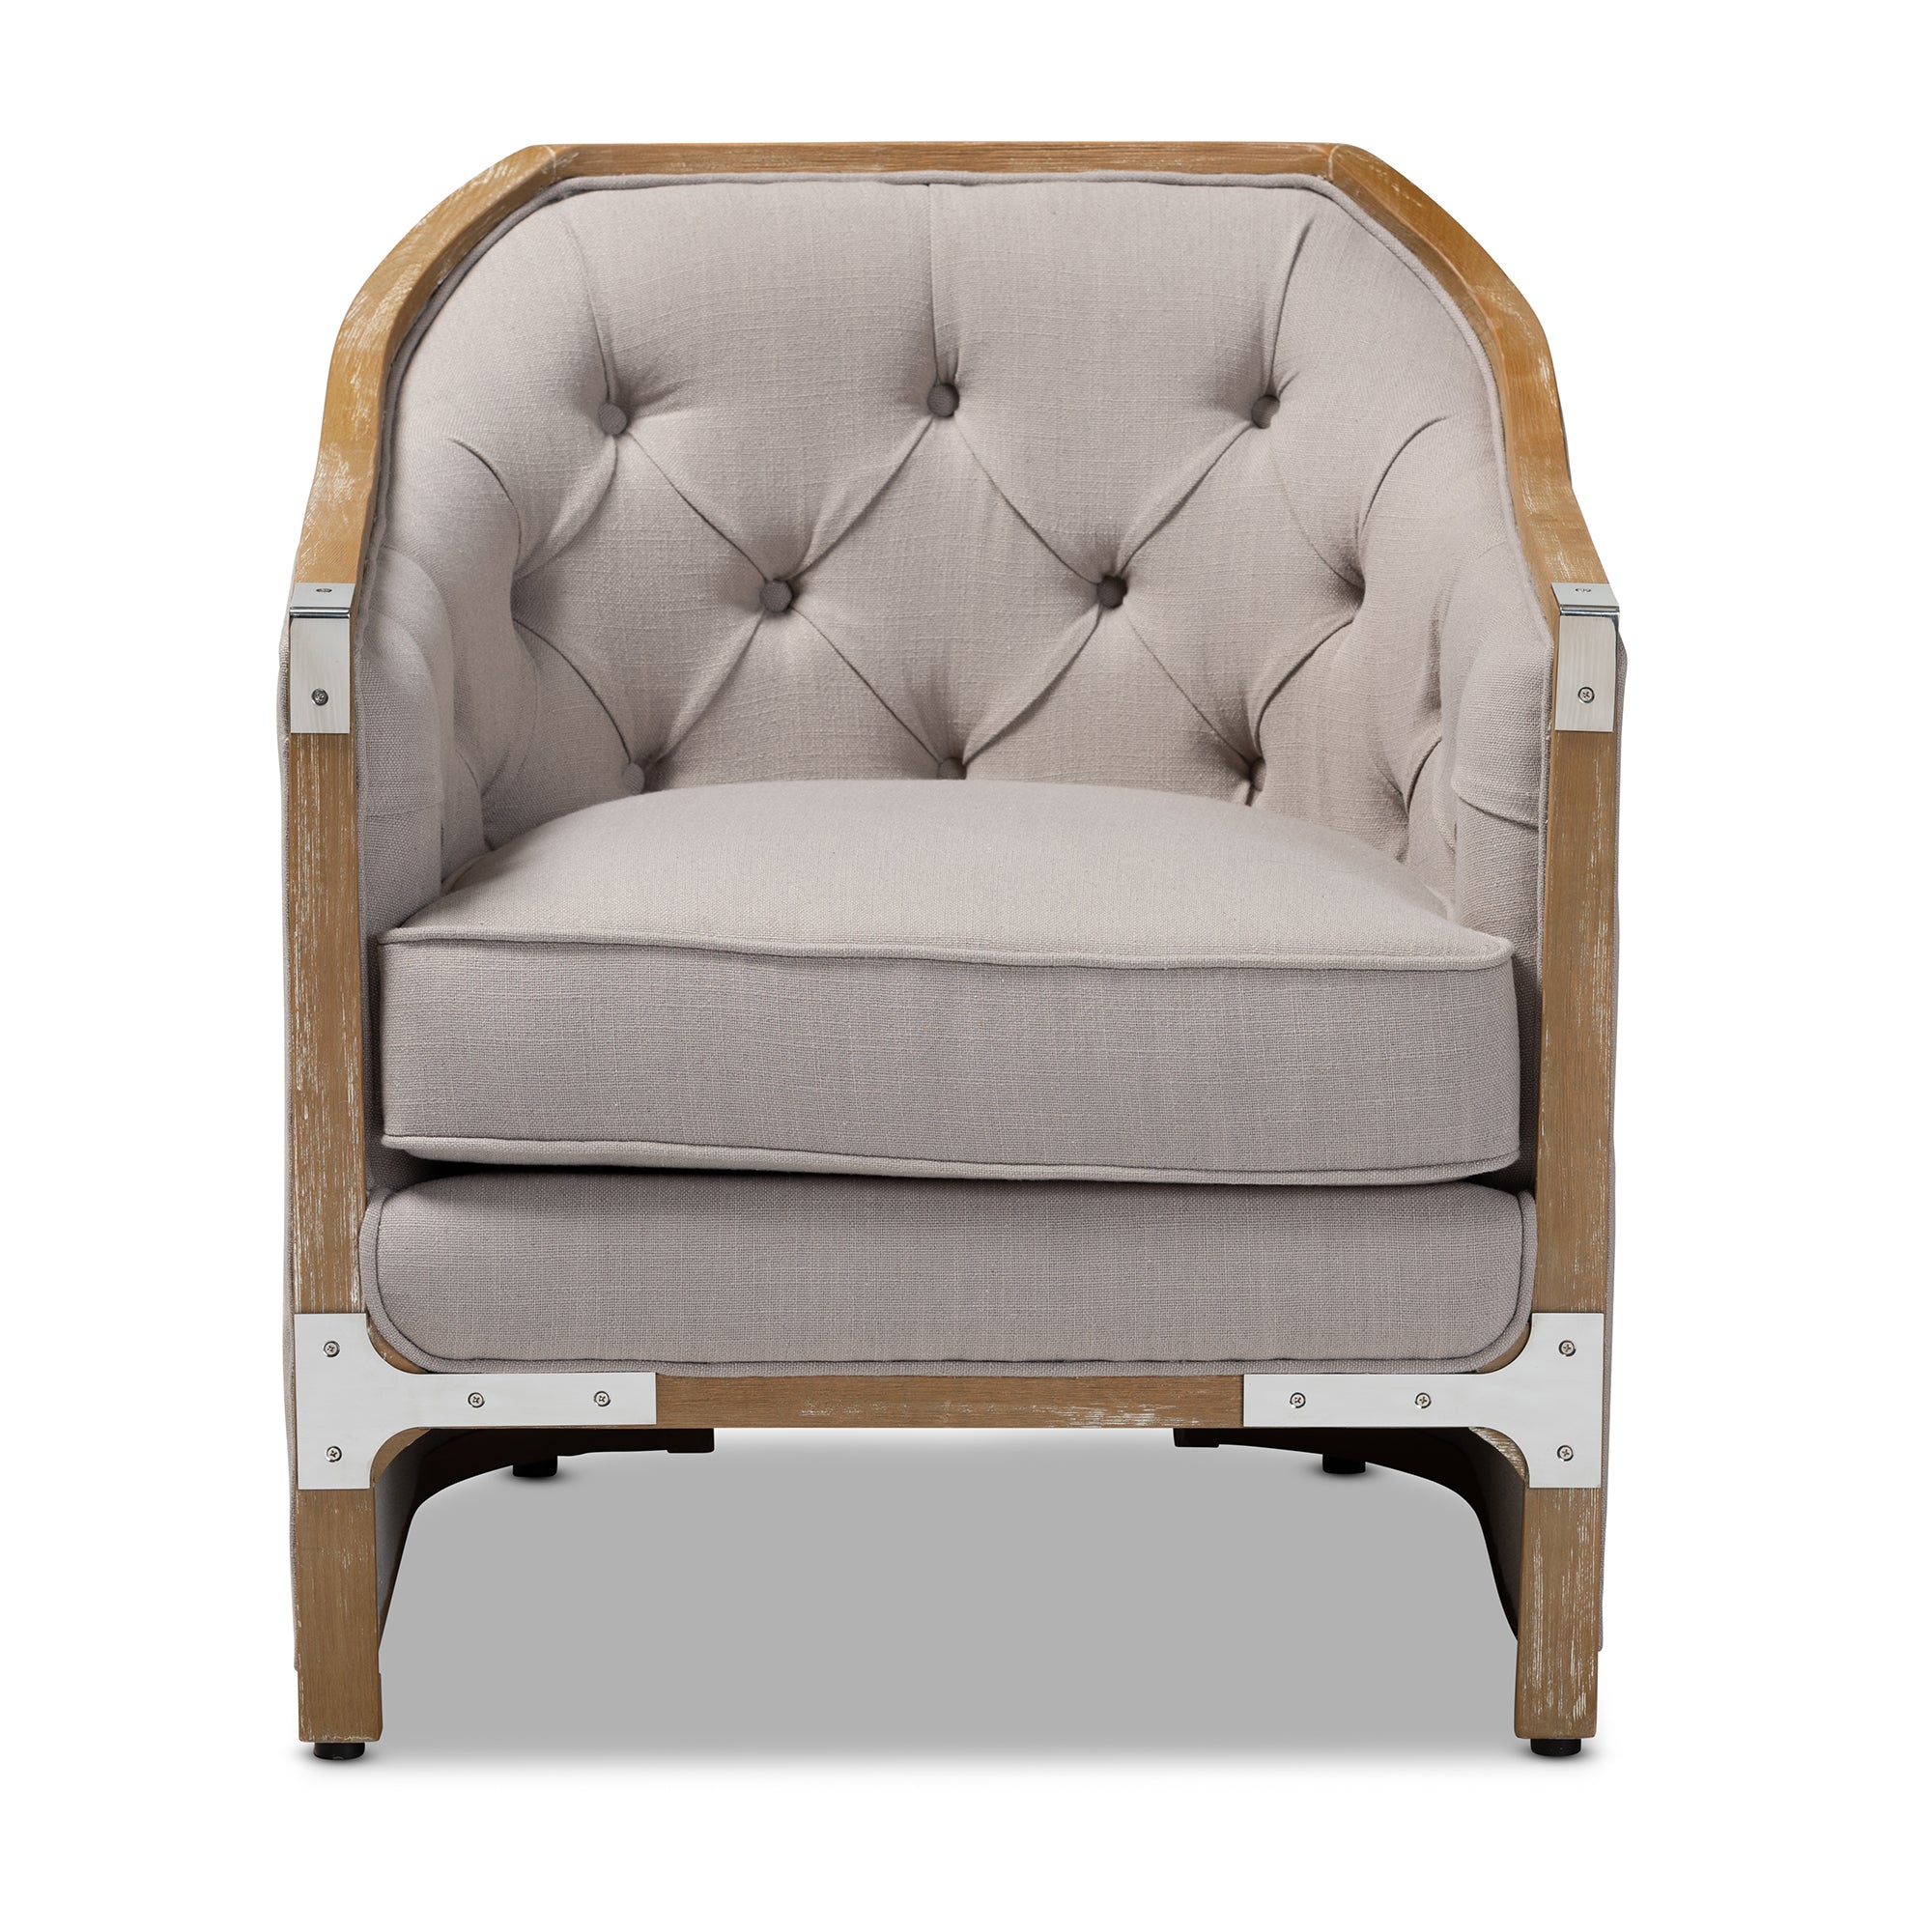 Terina French Provincial Chair Grey-Beige with Metal Accents-Chair-Baxton Studio - WI-Wall2Wall Furnishings